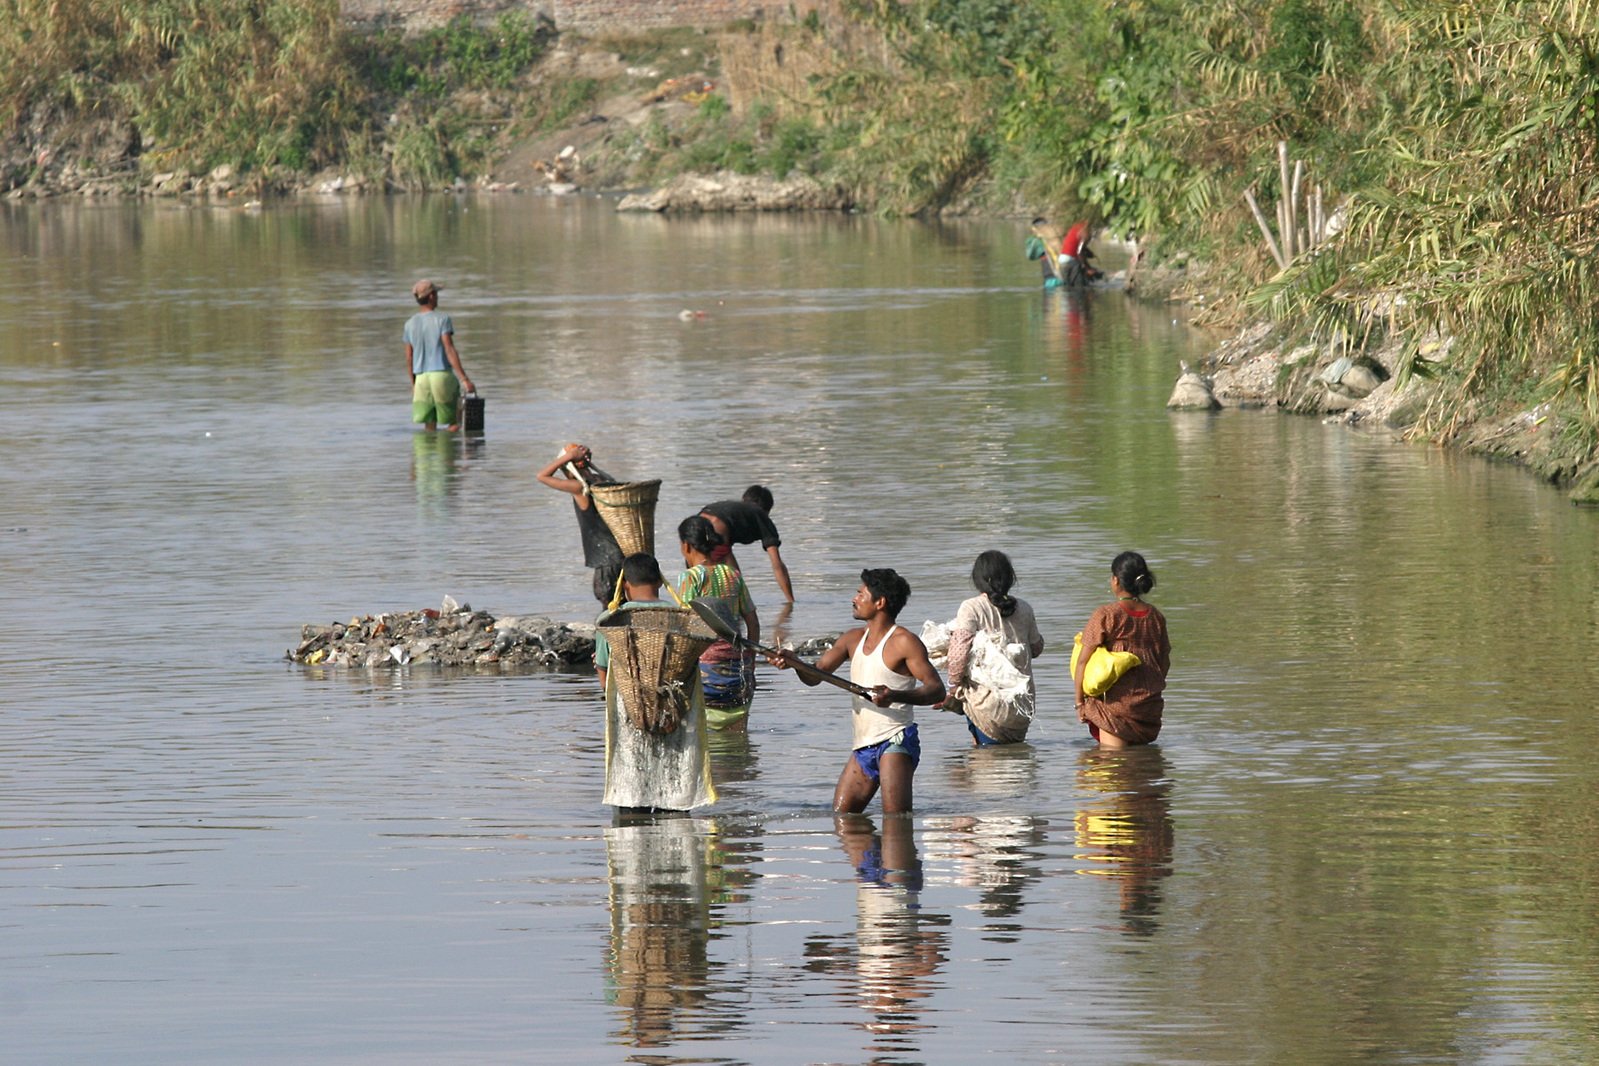 several people are bathing in the river